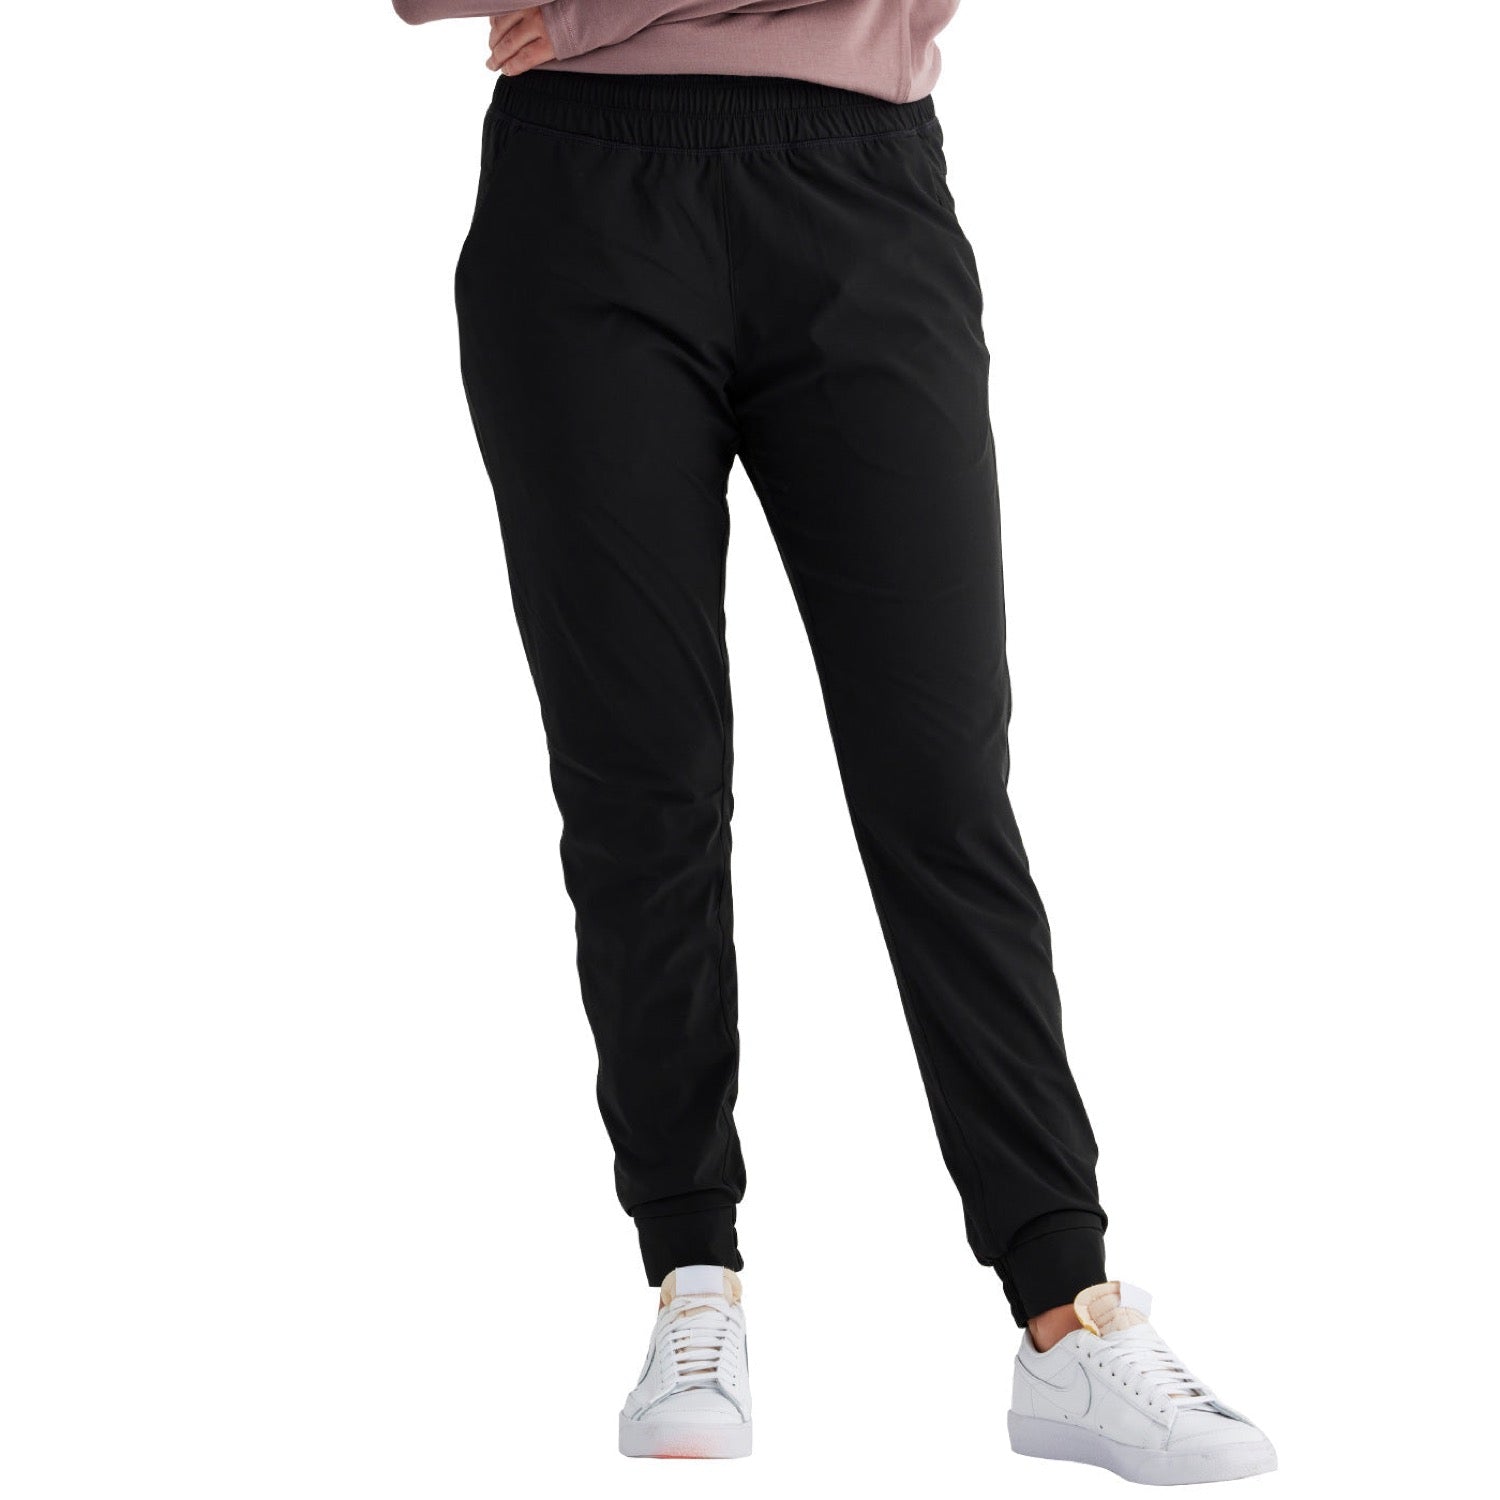 Free Fly Men's Stretch Canvas 5-Pocket Pant